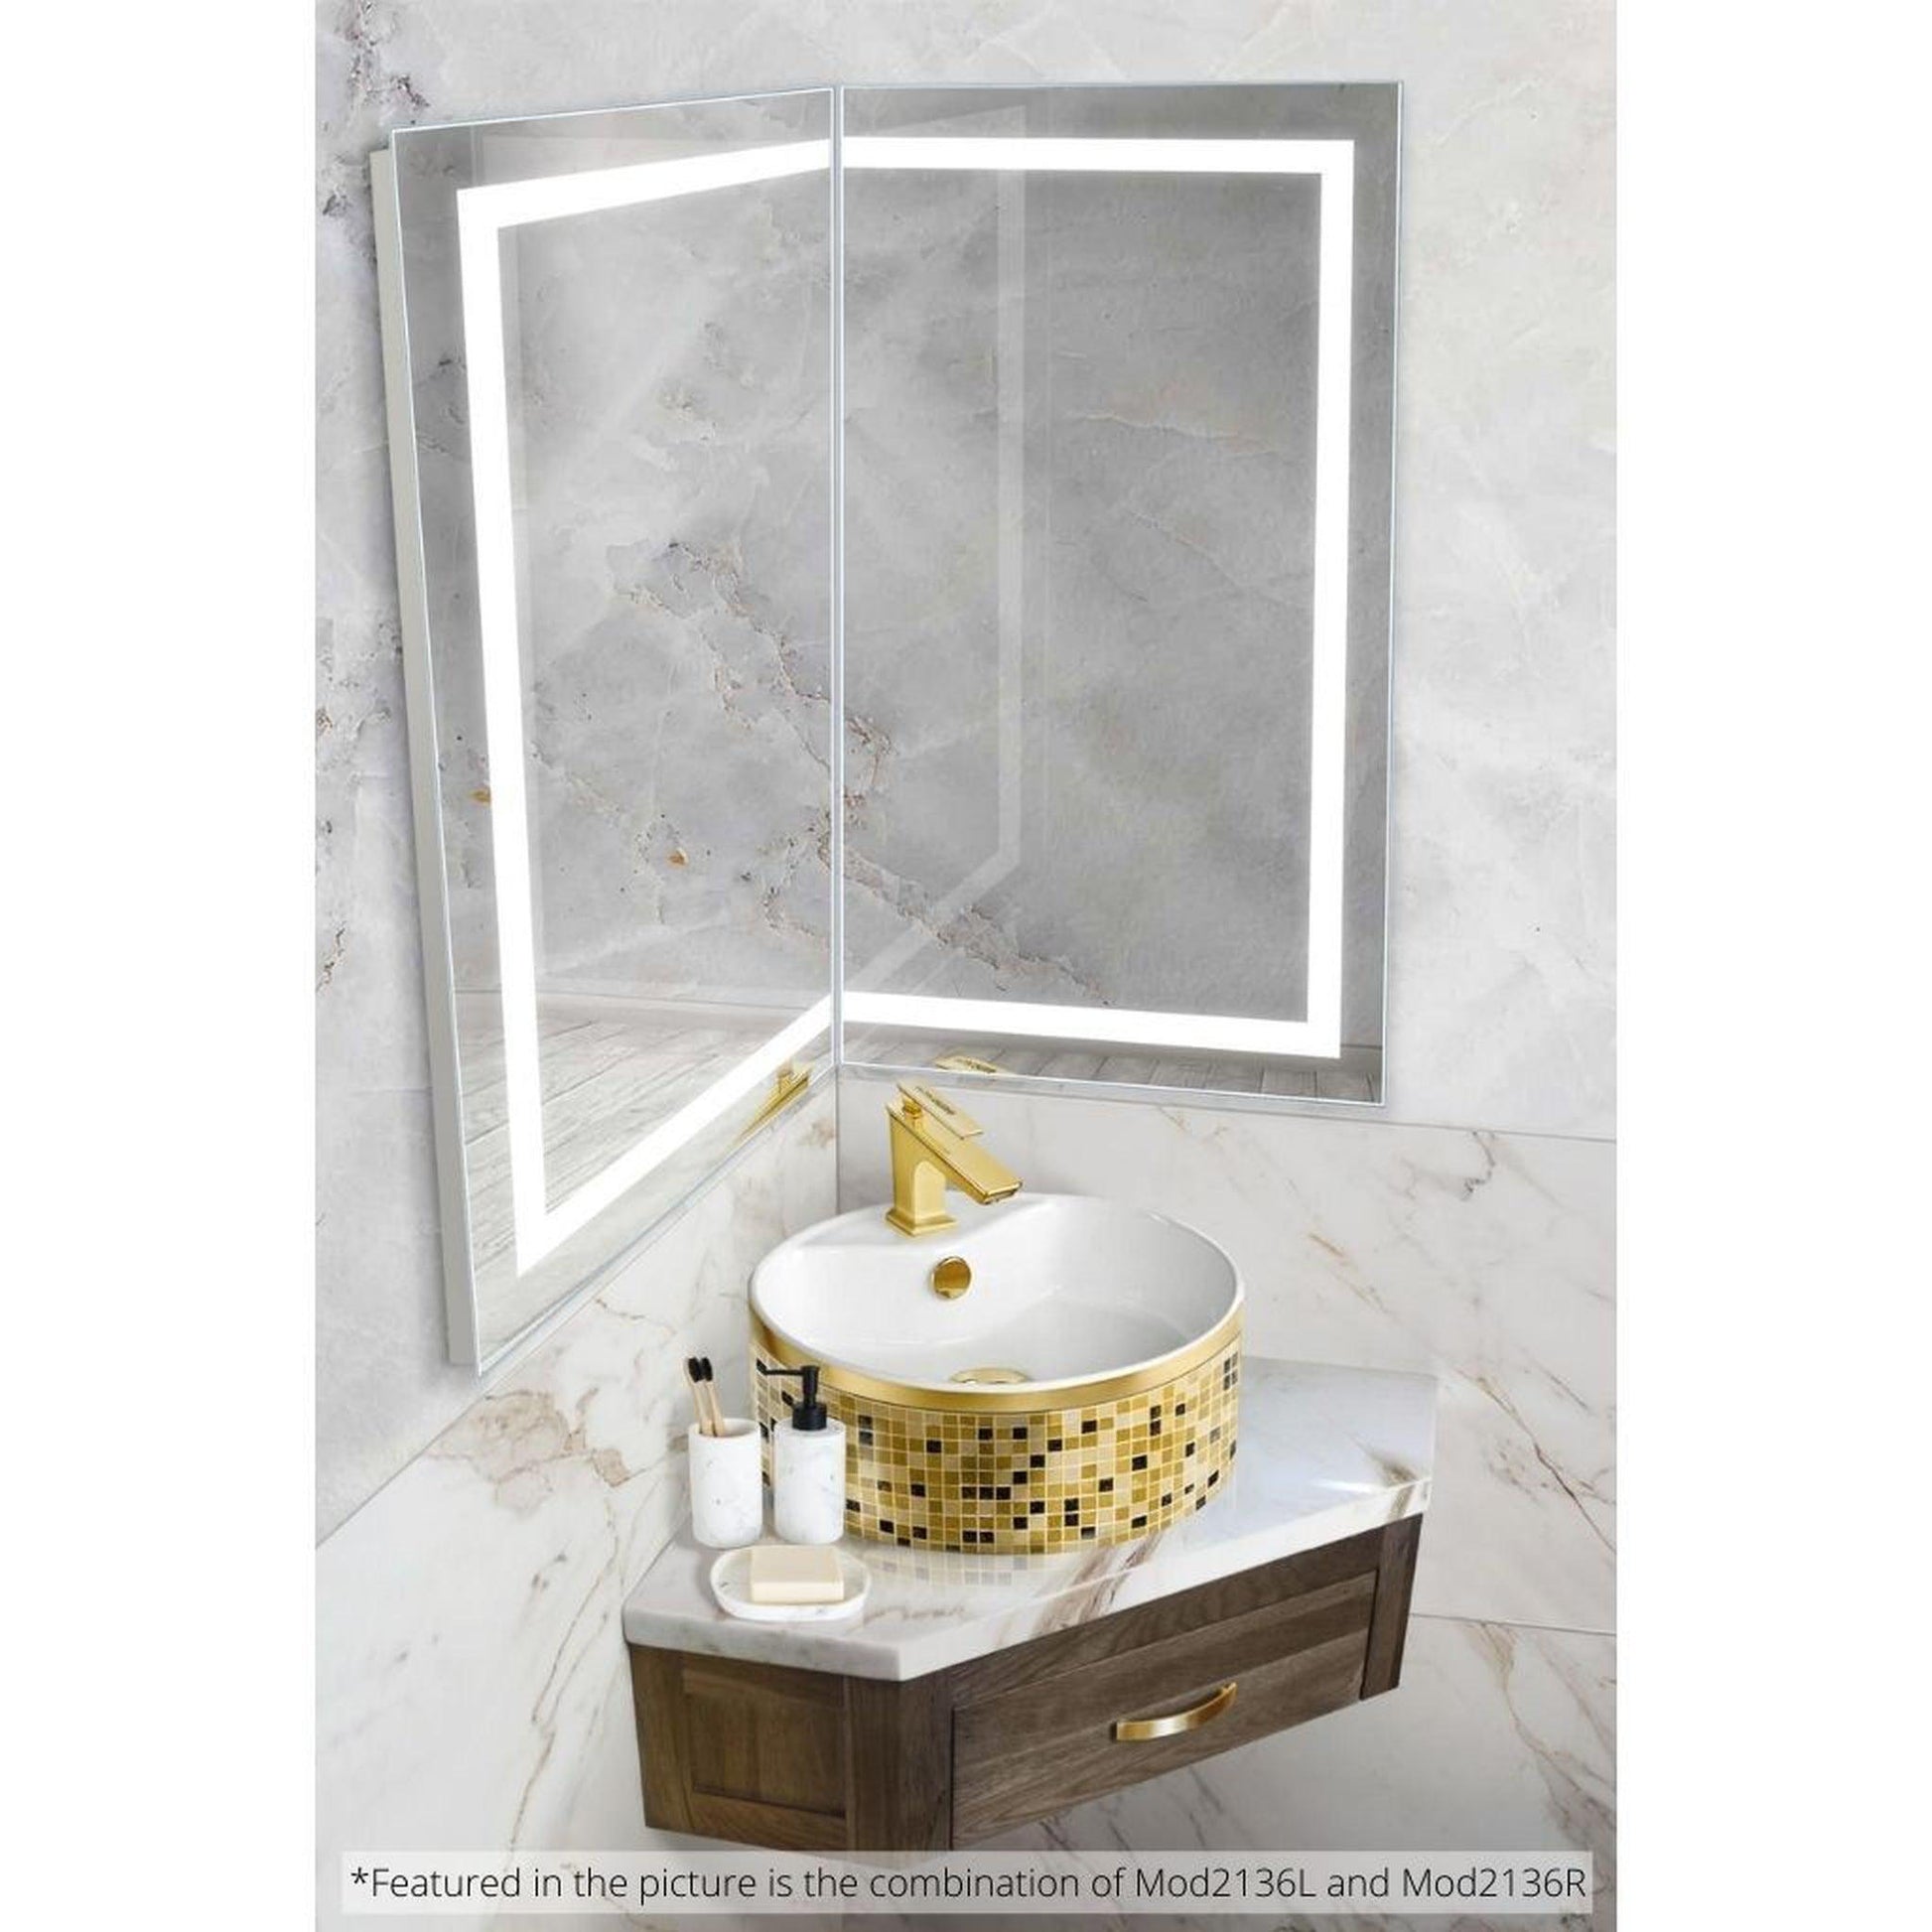 Krugg Reflections Mod 21" x 36" 5000K Rectangular Left Configuration Wall-Mounted Silver-Backed LED Bathroom Vanity Mirror With Built-in Defogger and Dimmer